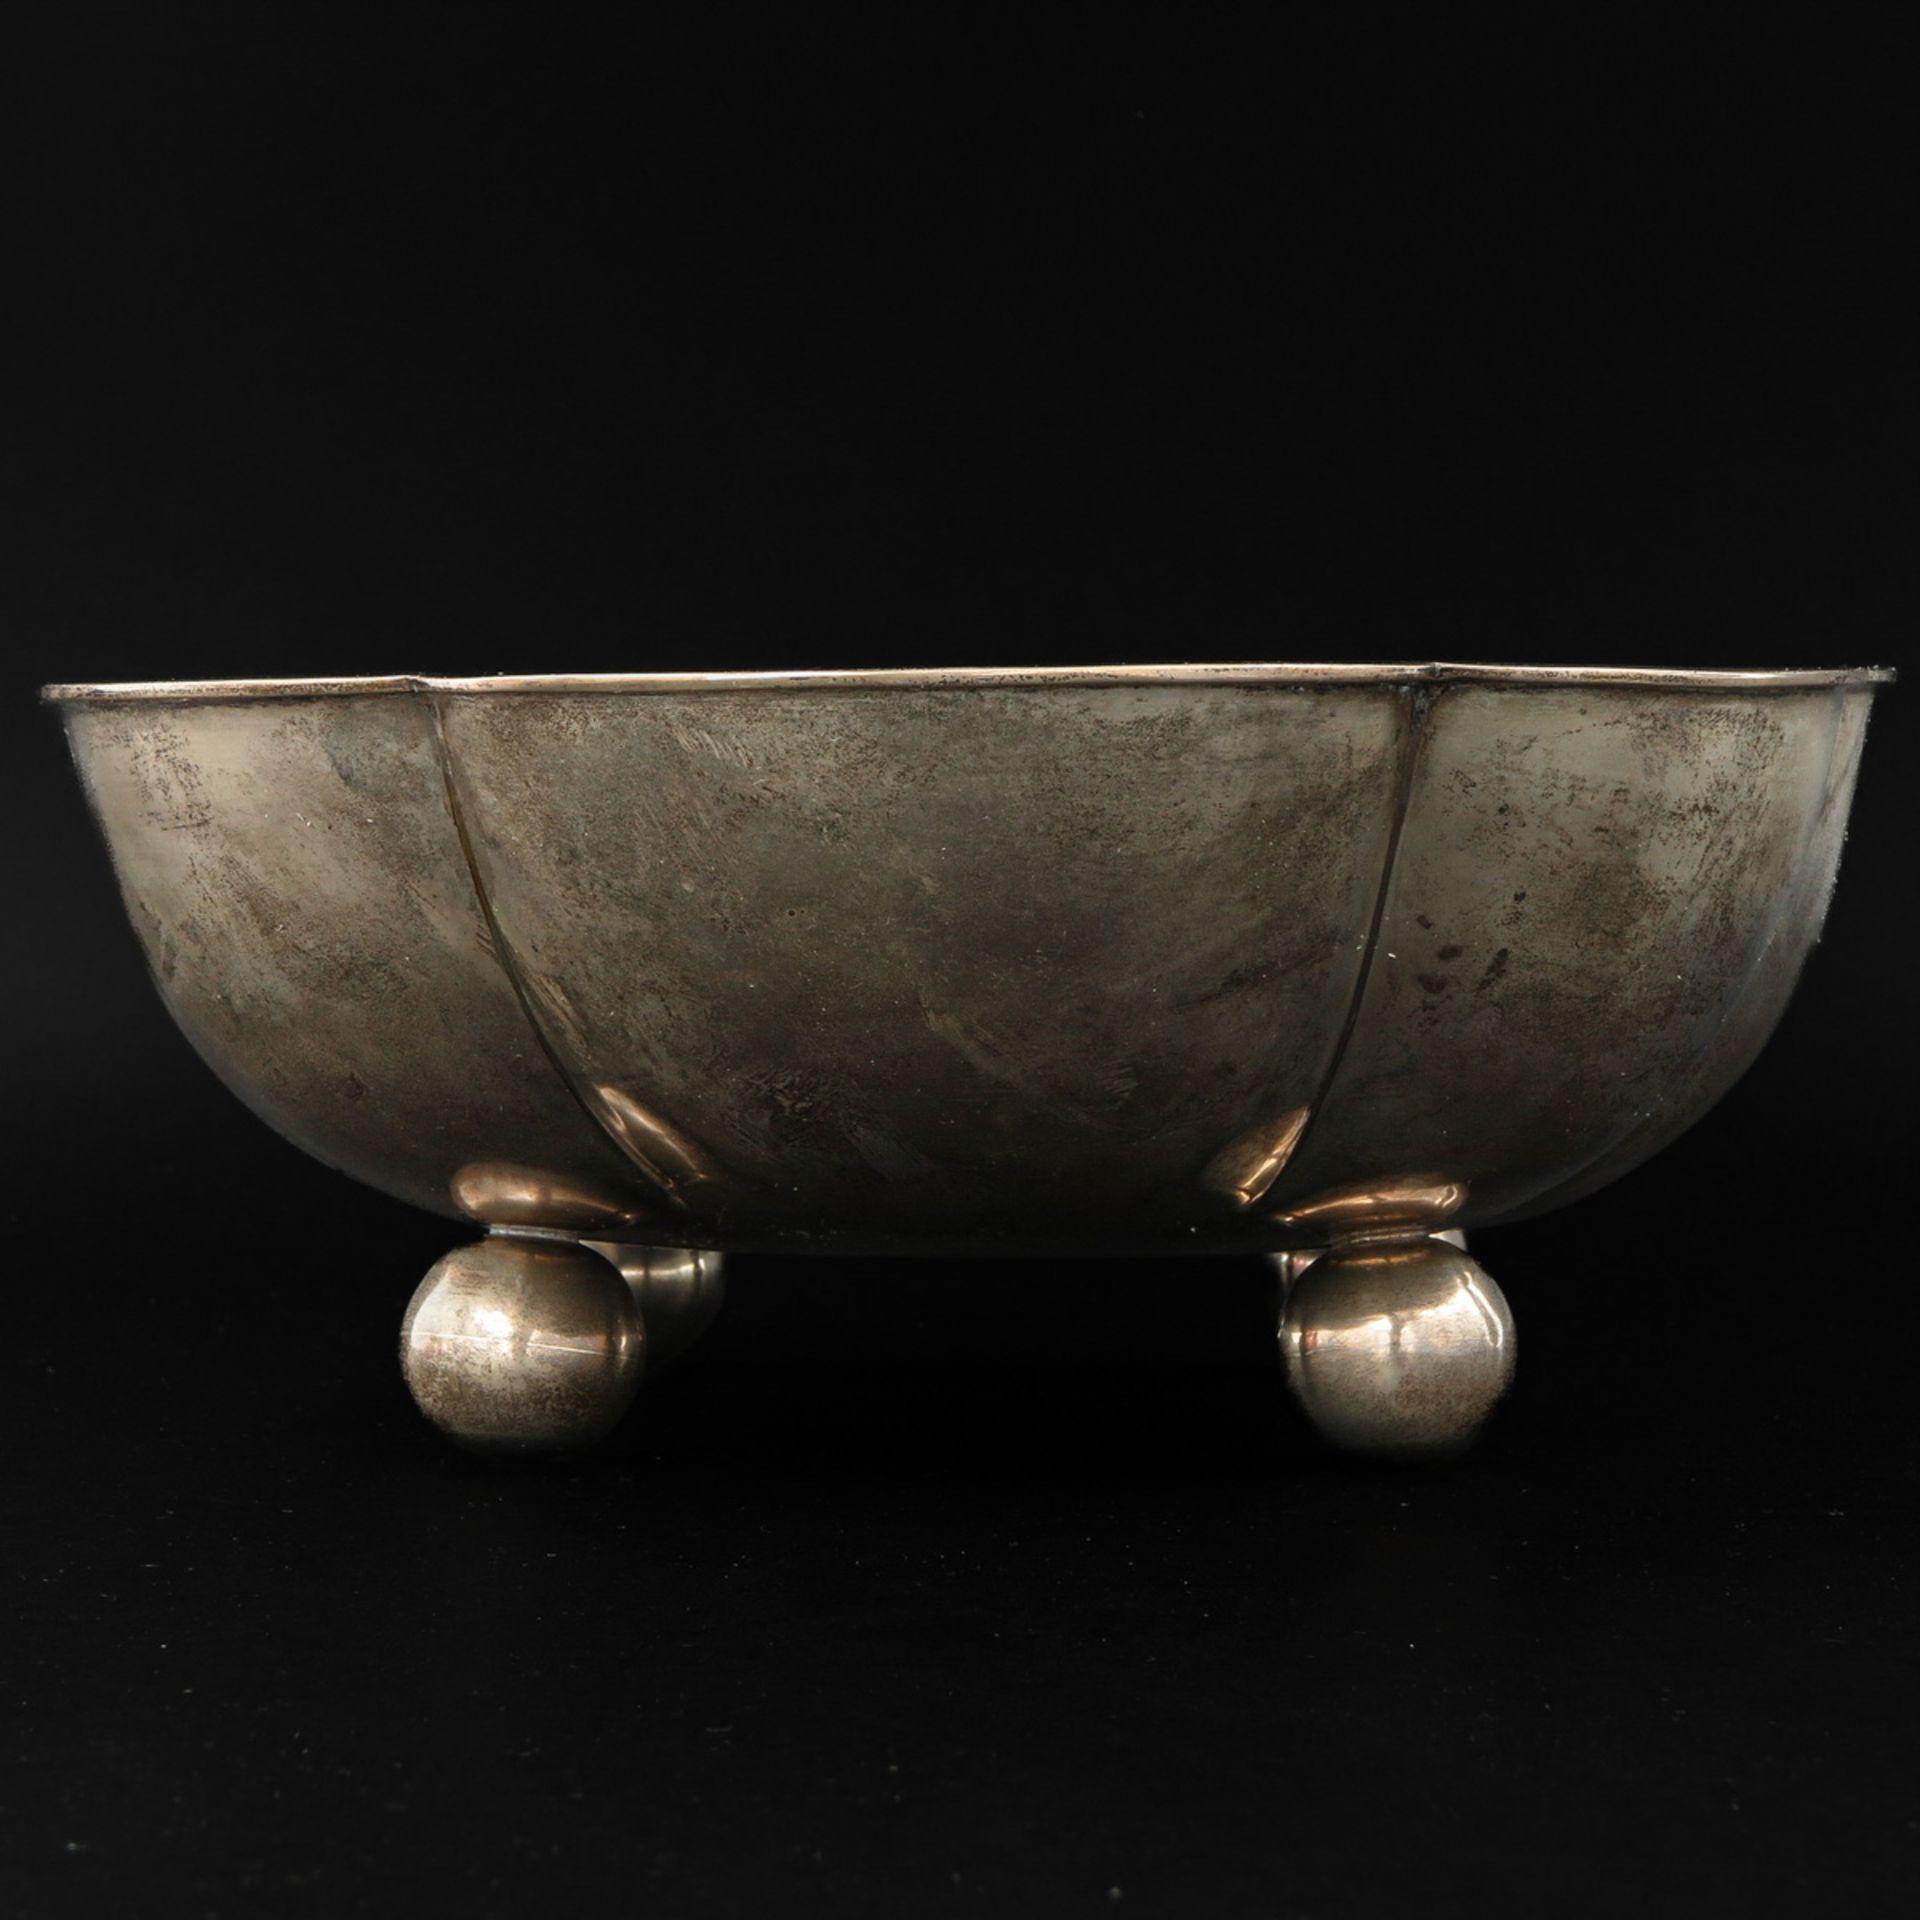 A Mexican Silver Dish - Image 4 of 7